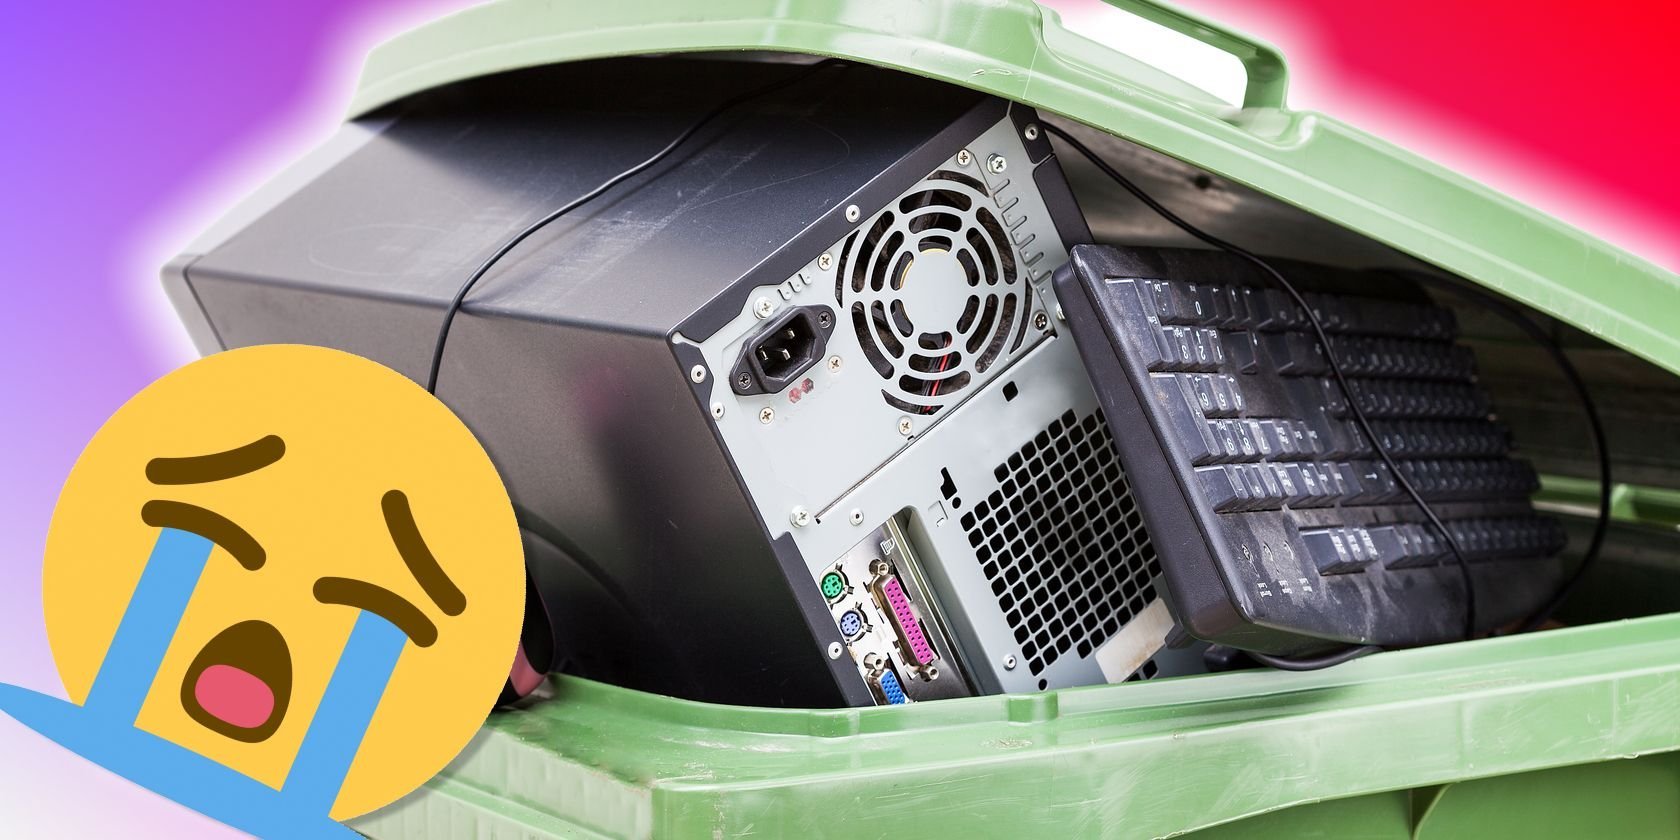 Here's How to Prepare Old Tech For Recycling